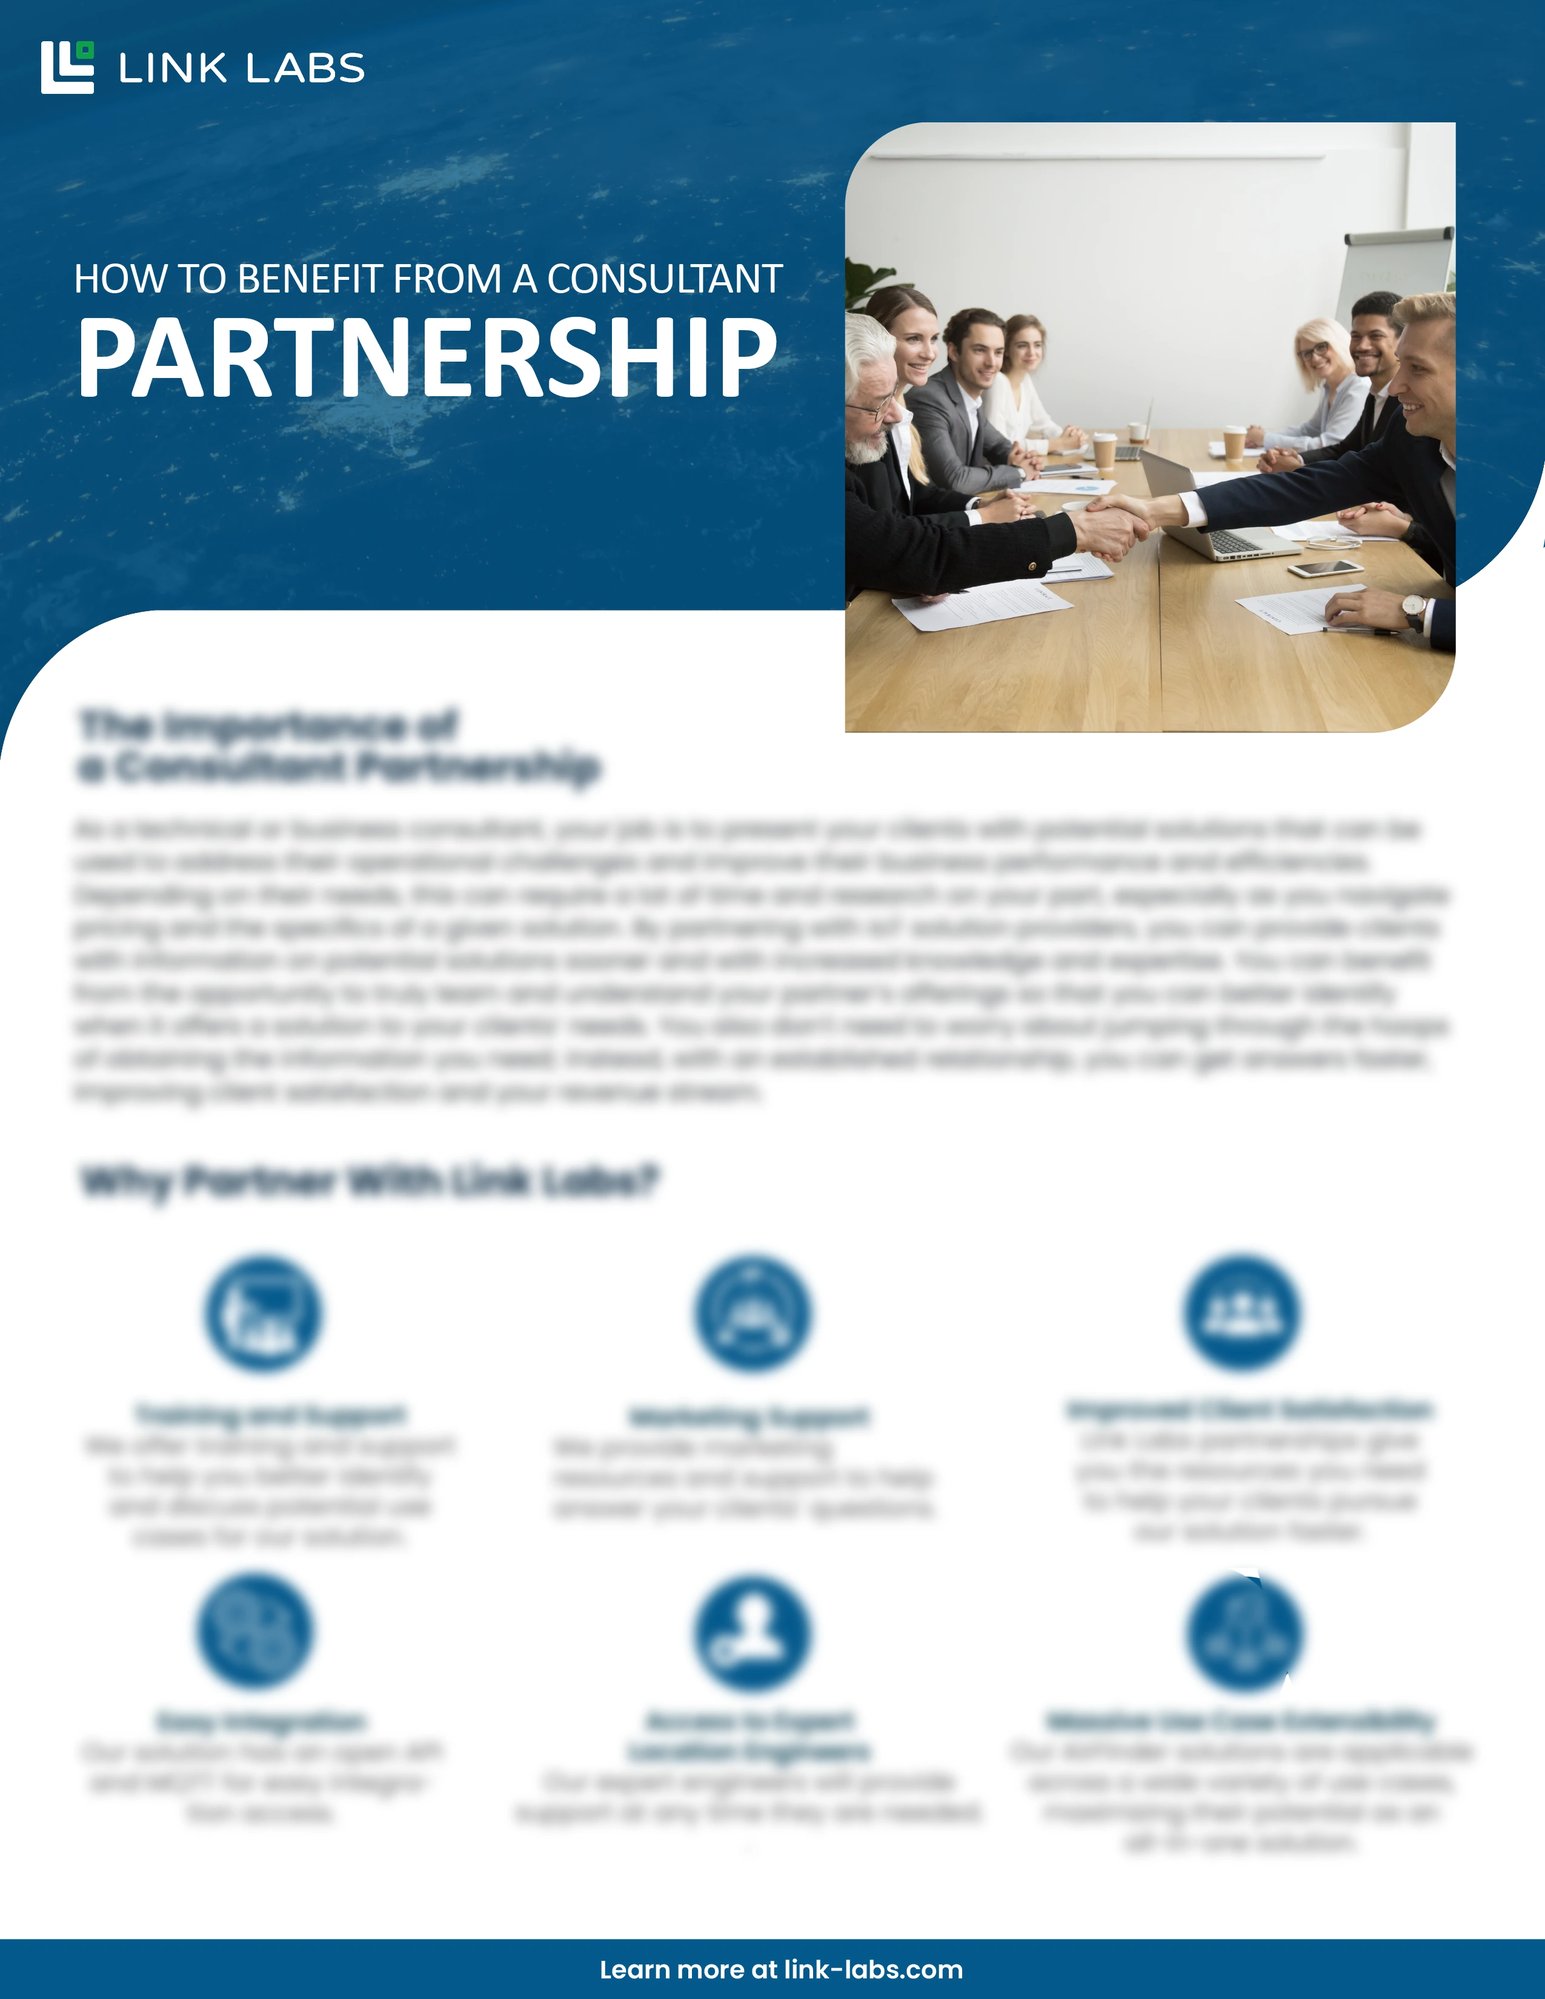 How to Benefit from a Consultant Partnership